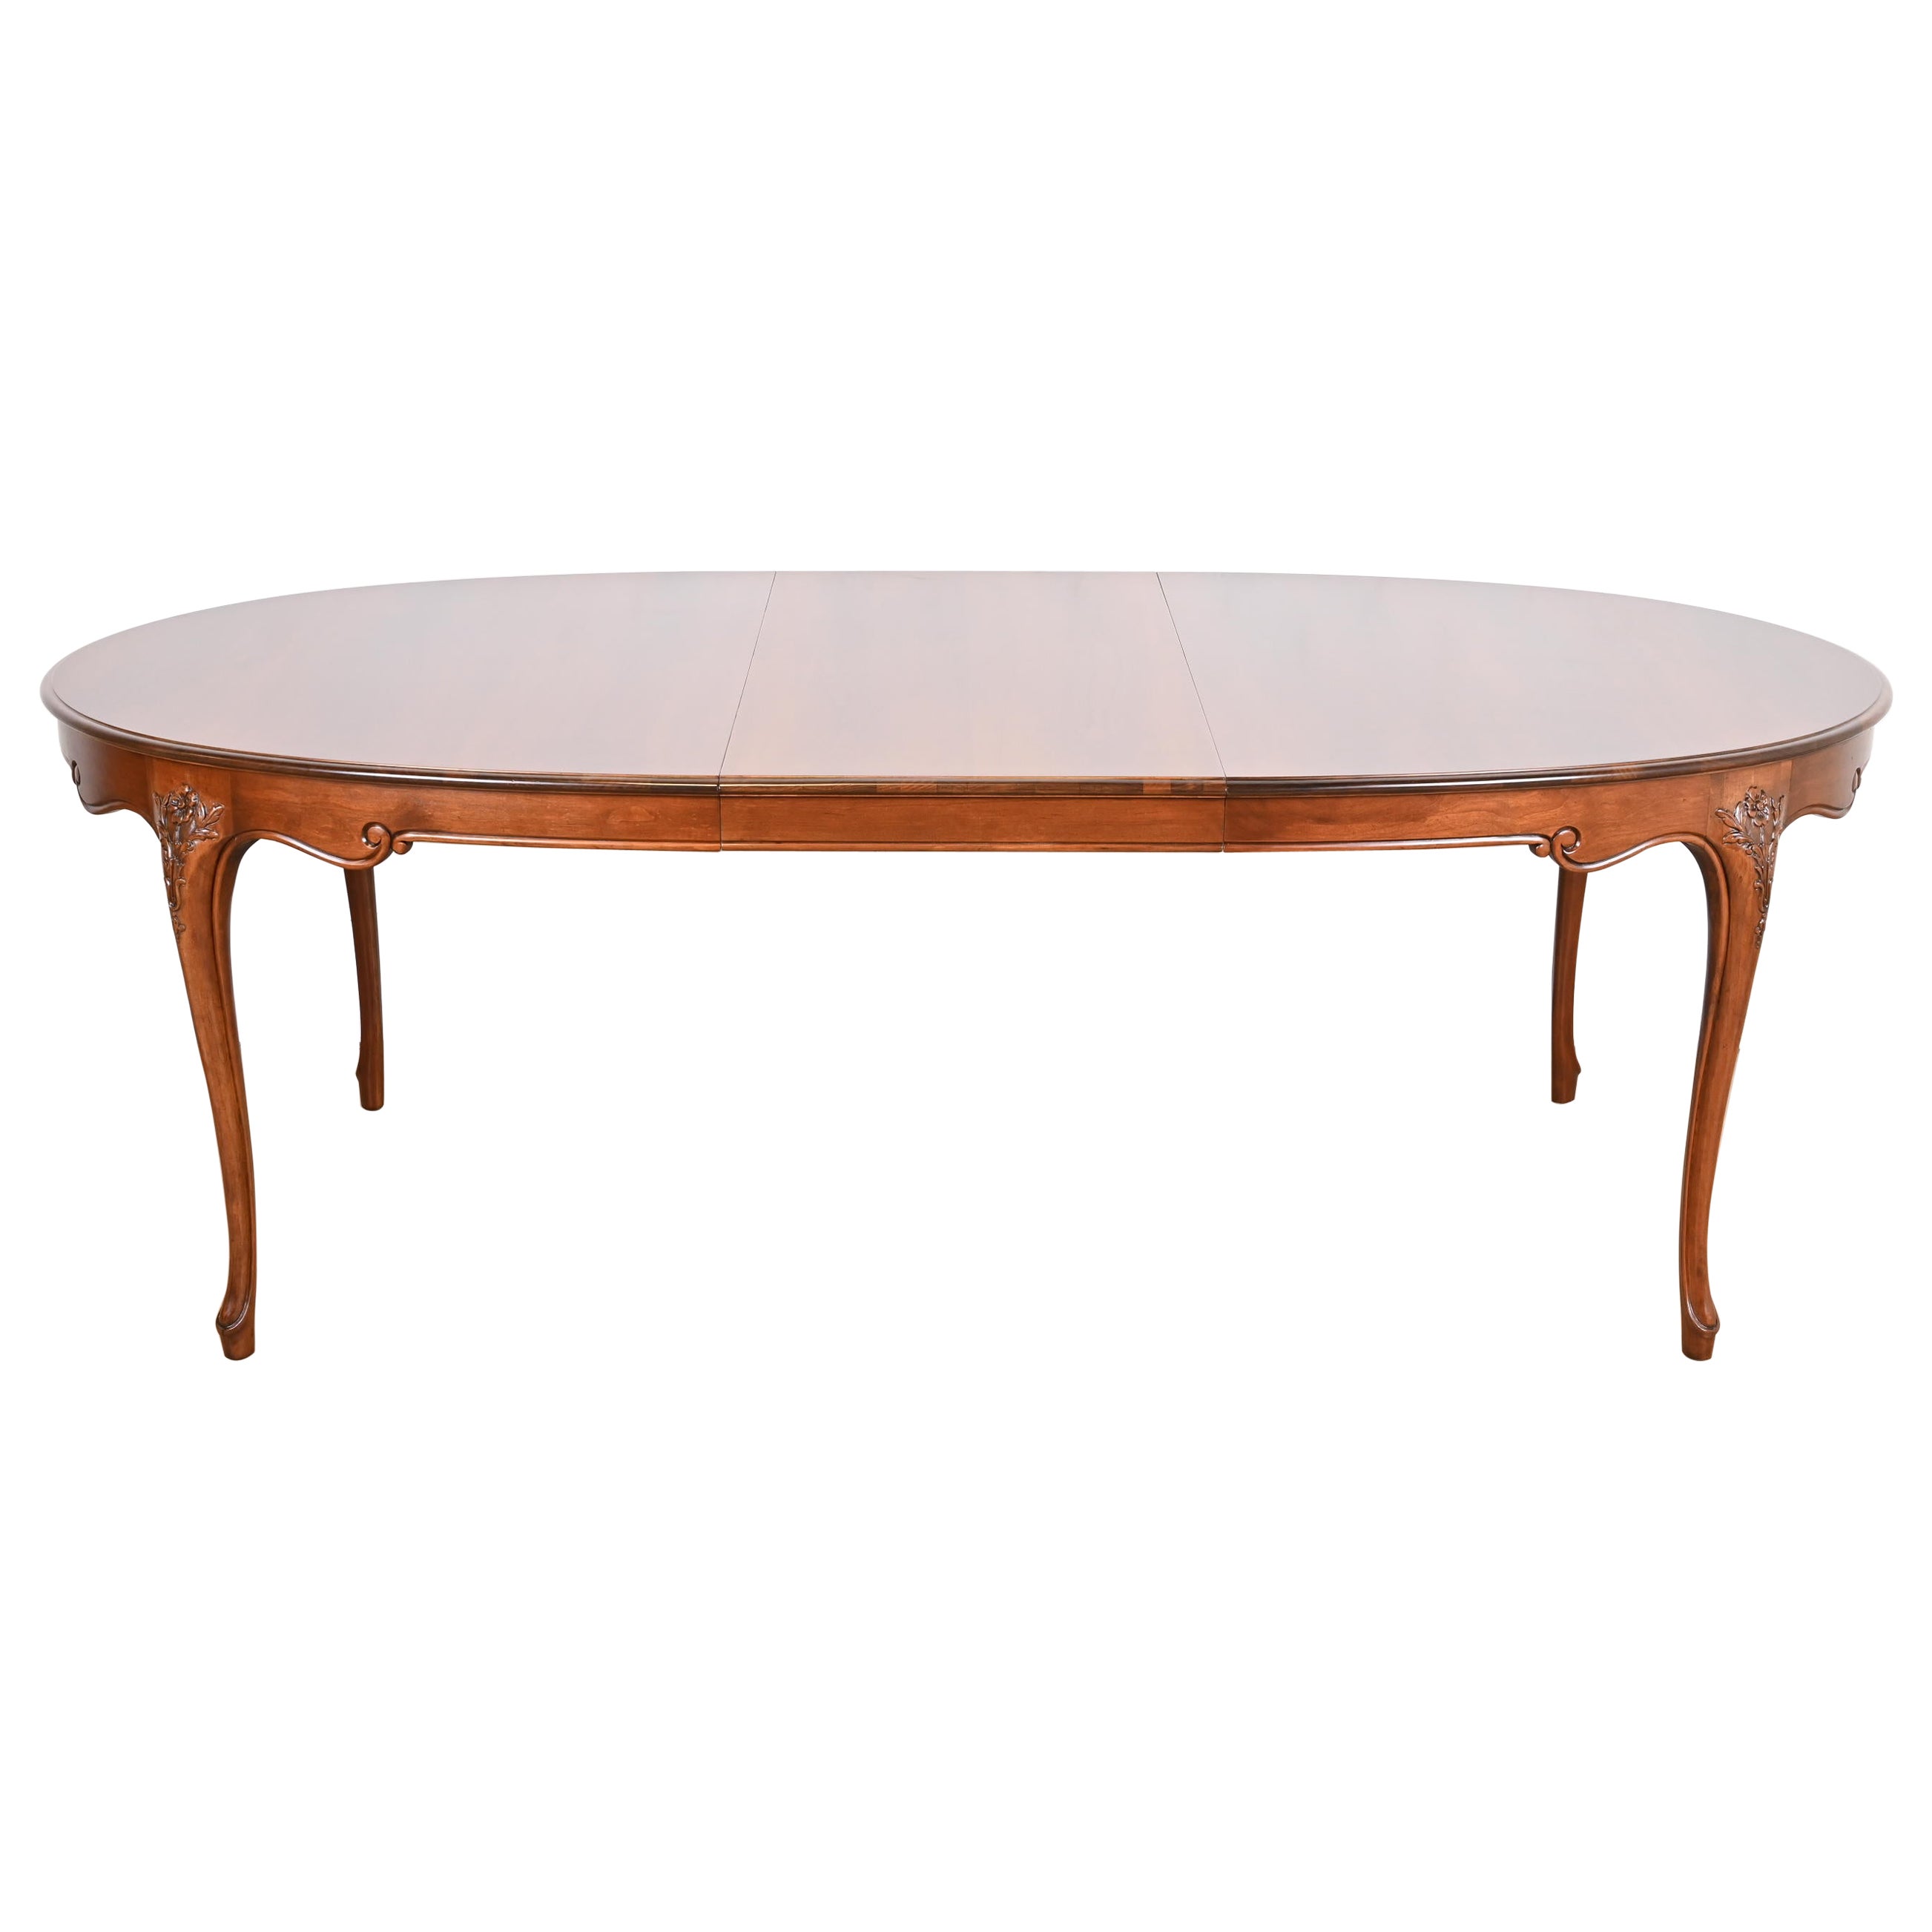 Baker Furniture French Provincial Louis XV Cherry Wood Dining Table, Refinished